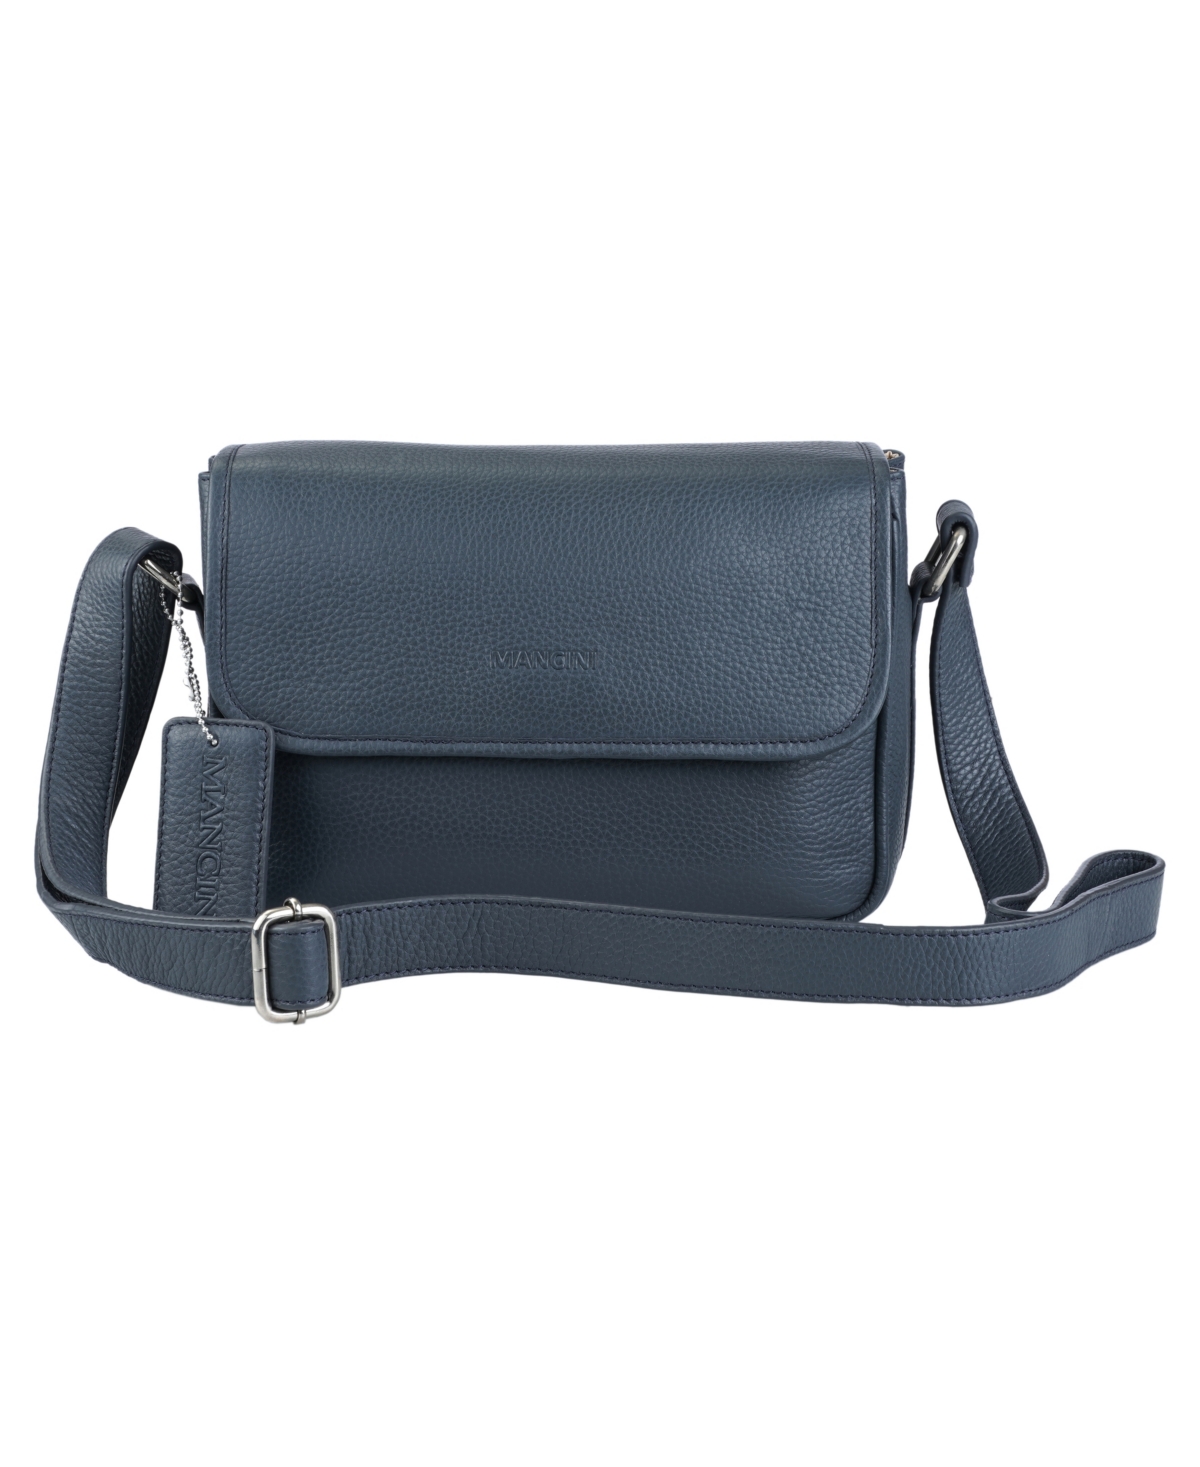 Mancini Pebbled Collection Kimberly Leather Flap Closure Handbag In Navy